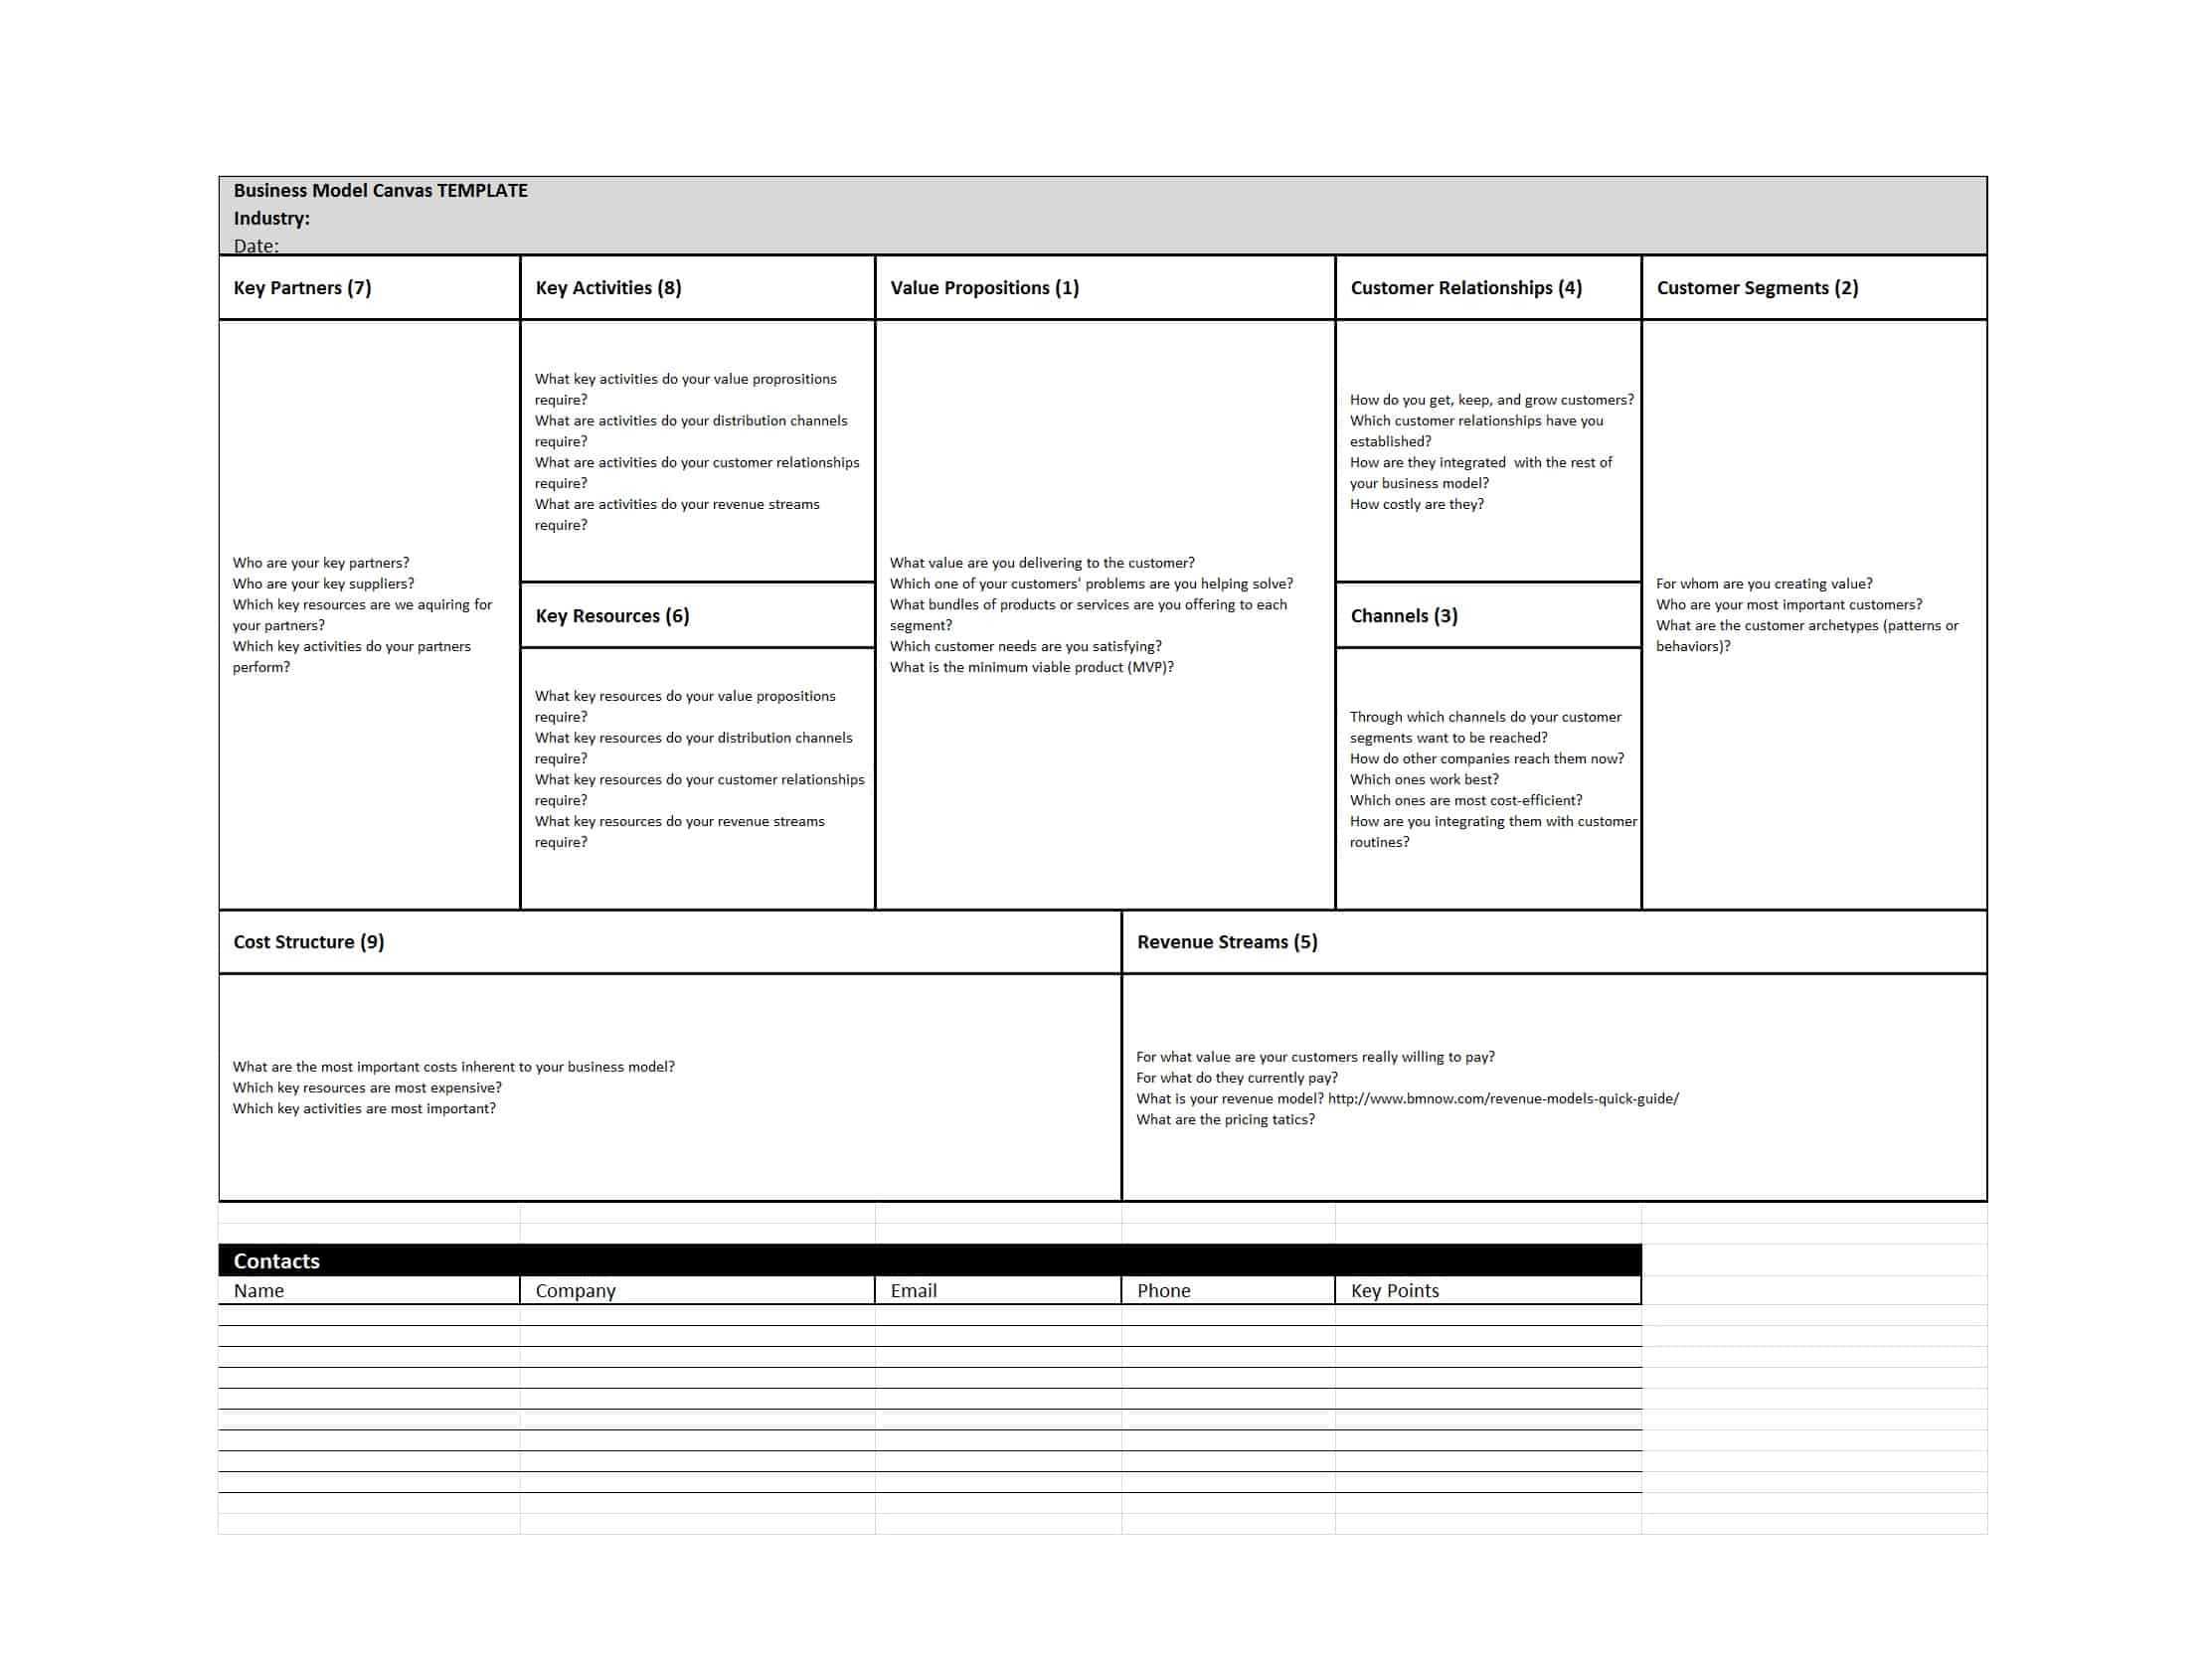 50 Amazing Business Model Canvas Templates ᐅ Templatelab Intended For Business Model Canvas Template Word